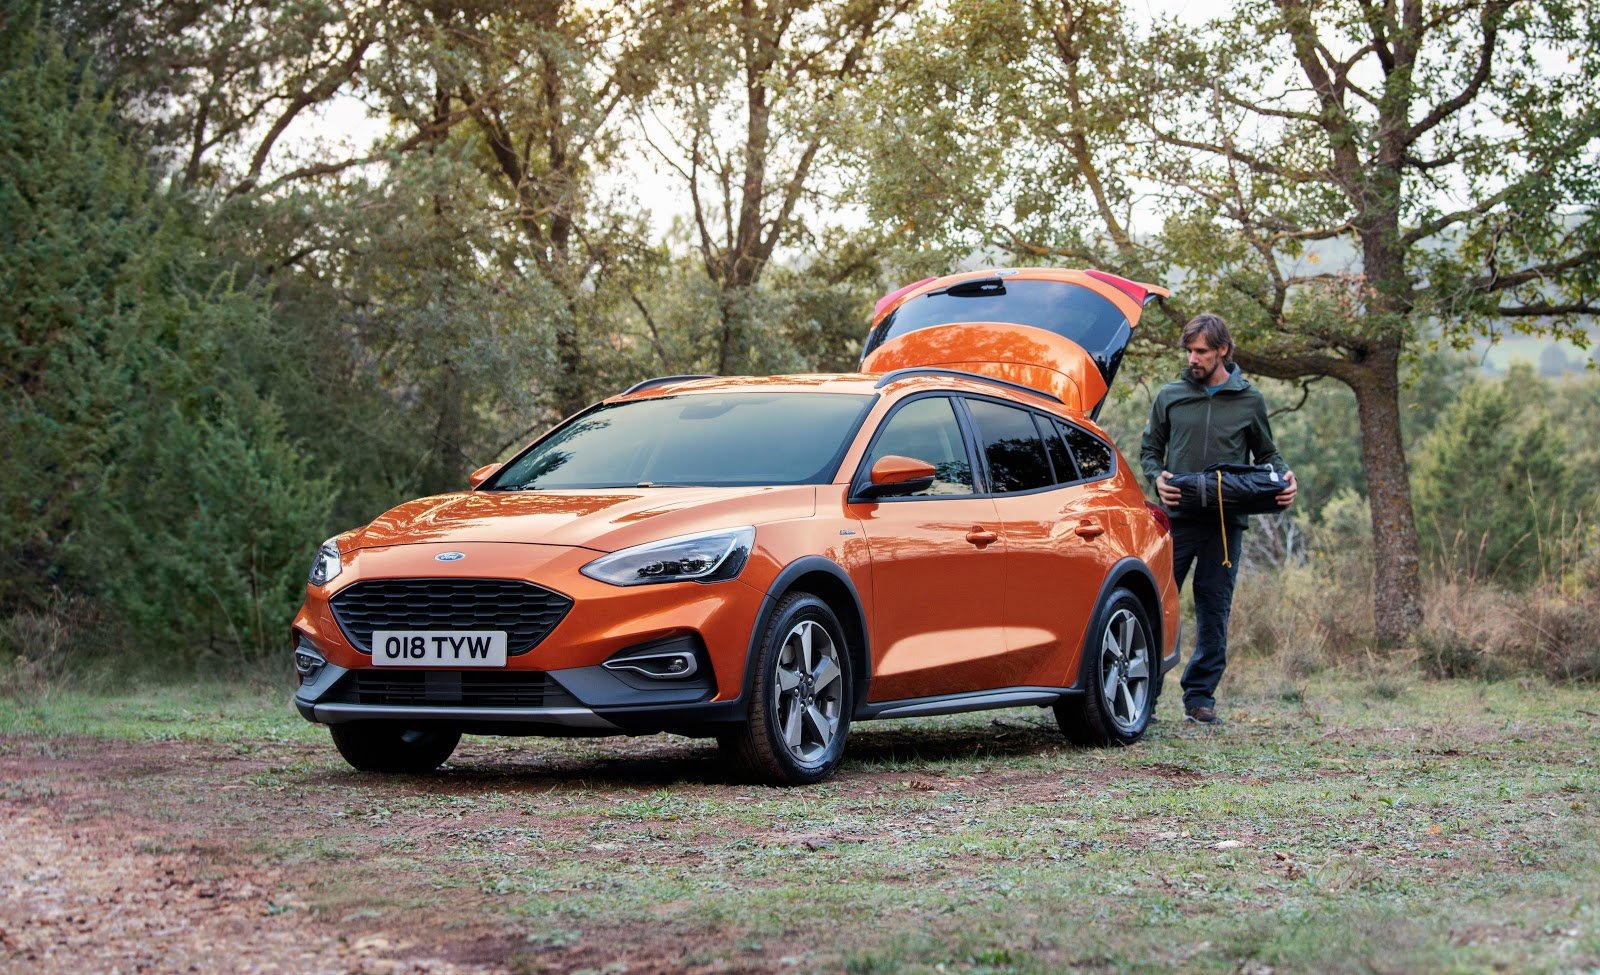 Ford Focus Active via Ford News Europe